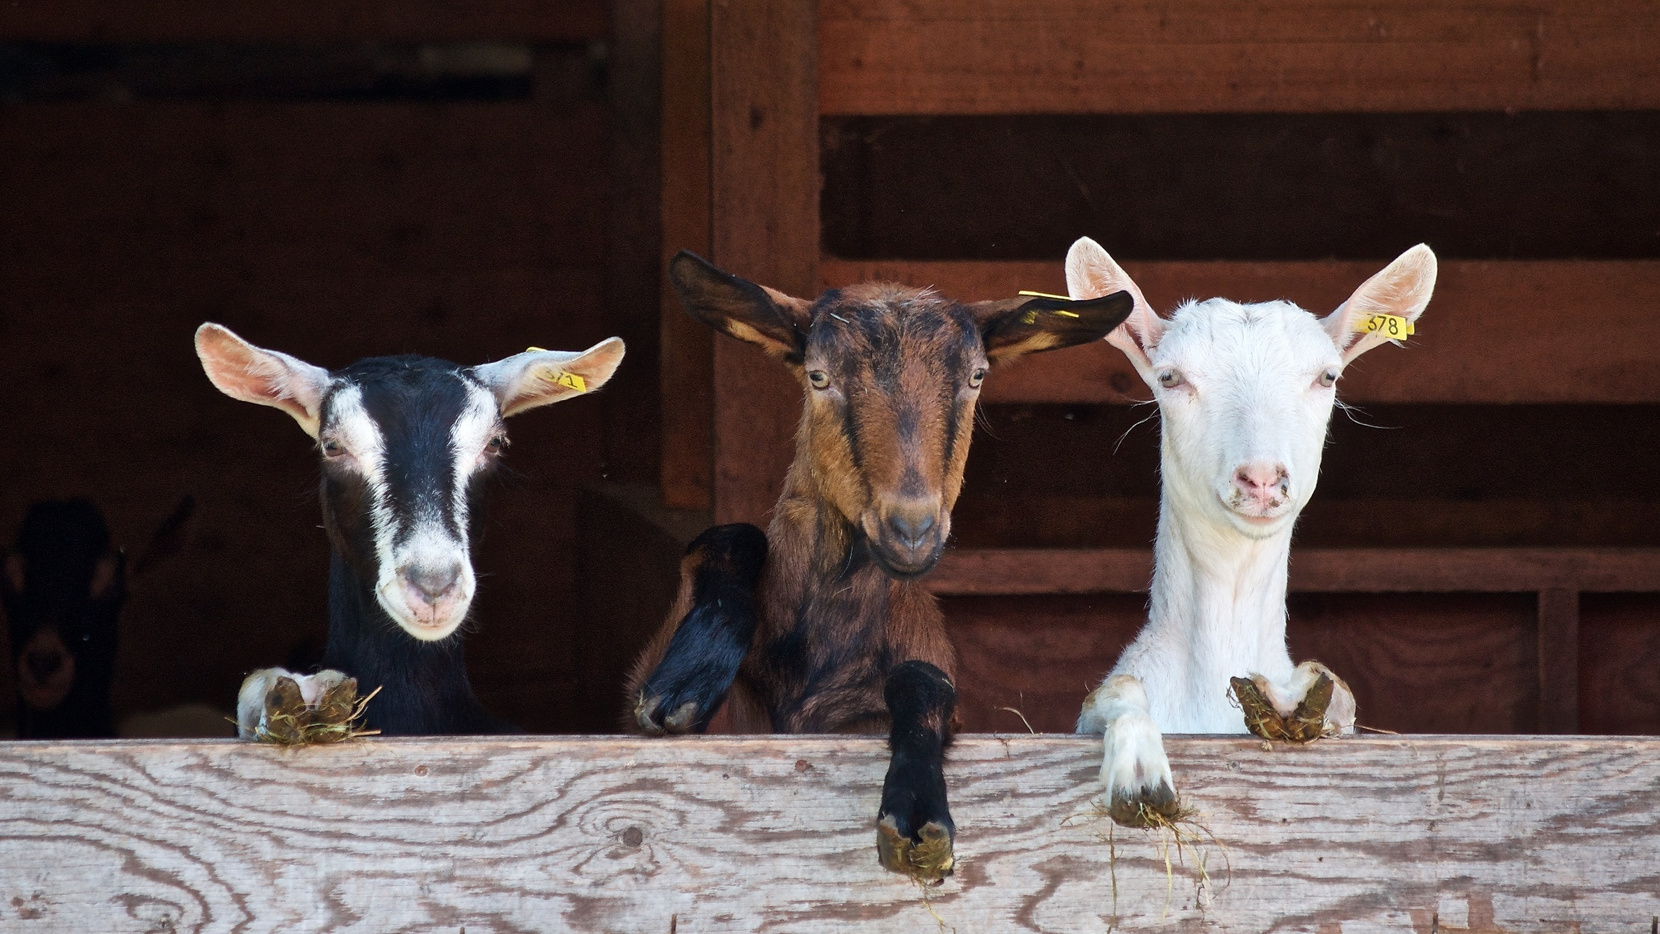 Goats in the Barn